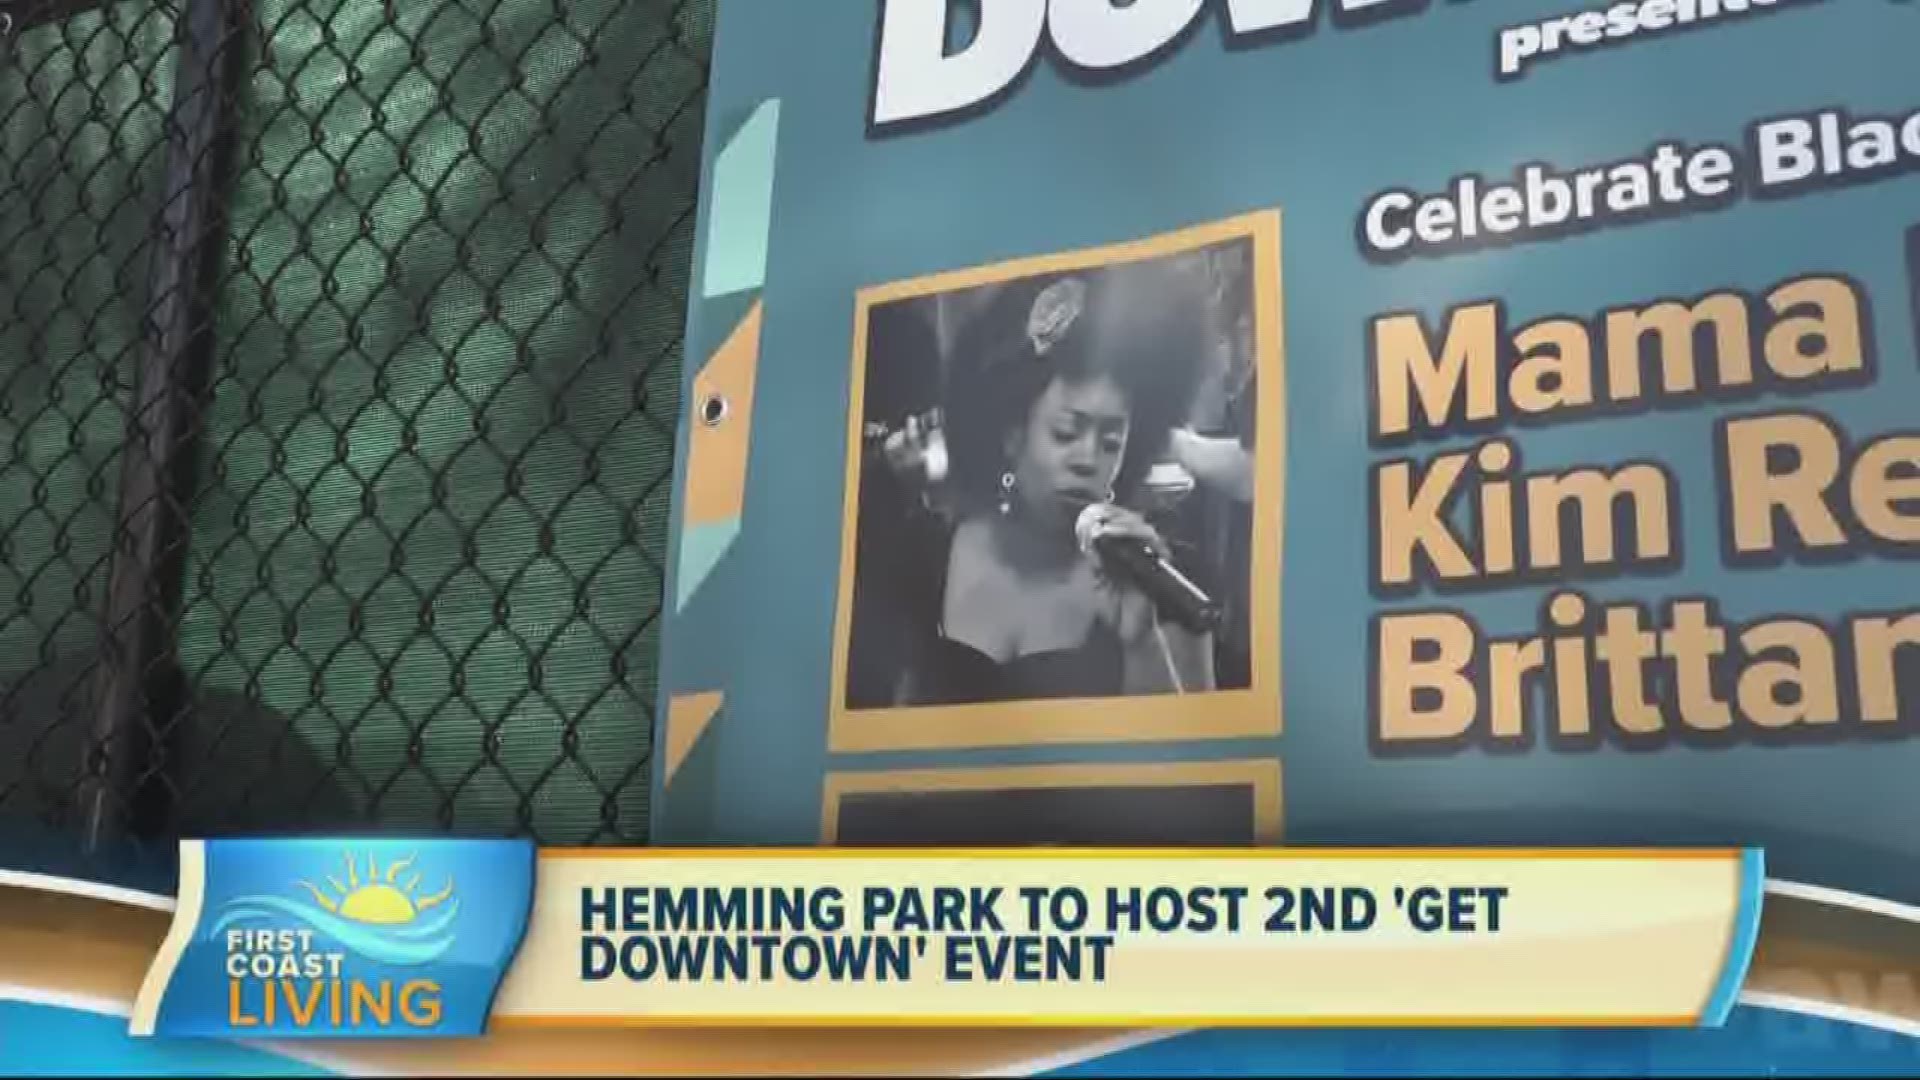 From food to music to dancing, there's something for everyone this Saturday at Hemming Park's Get Down(town!) event.